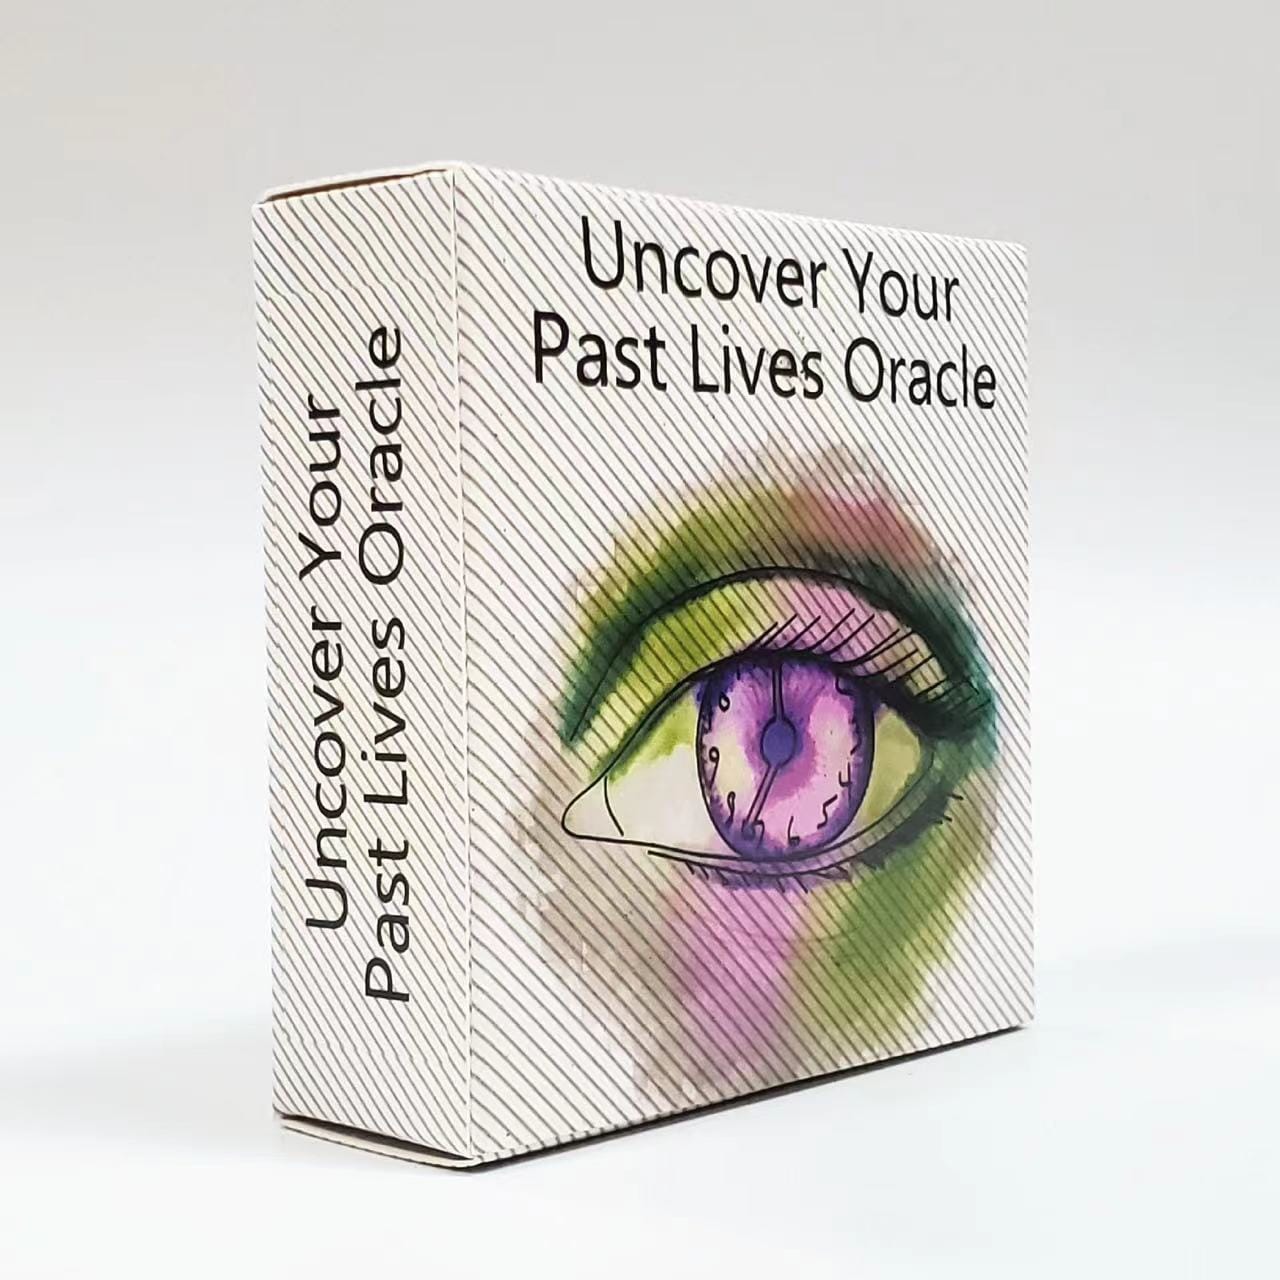 Uncover Your Past Lives Oracle